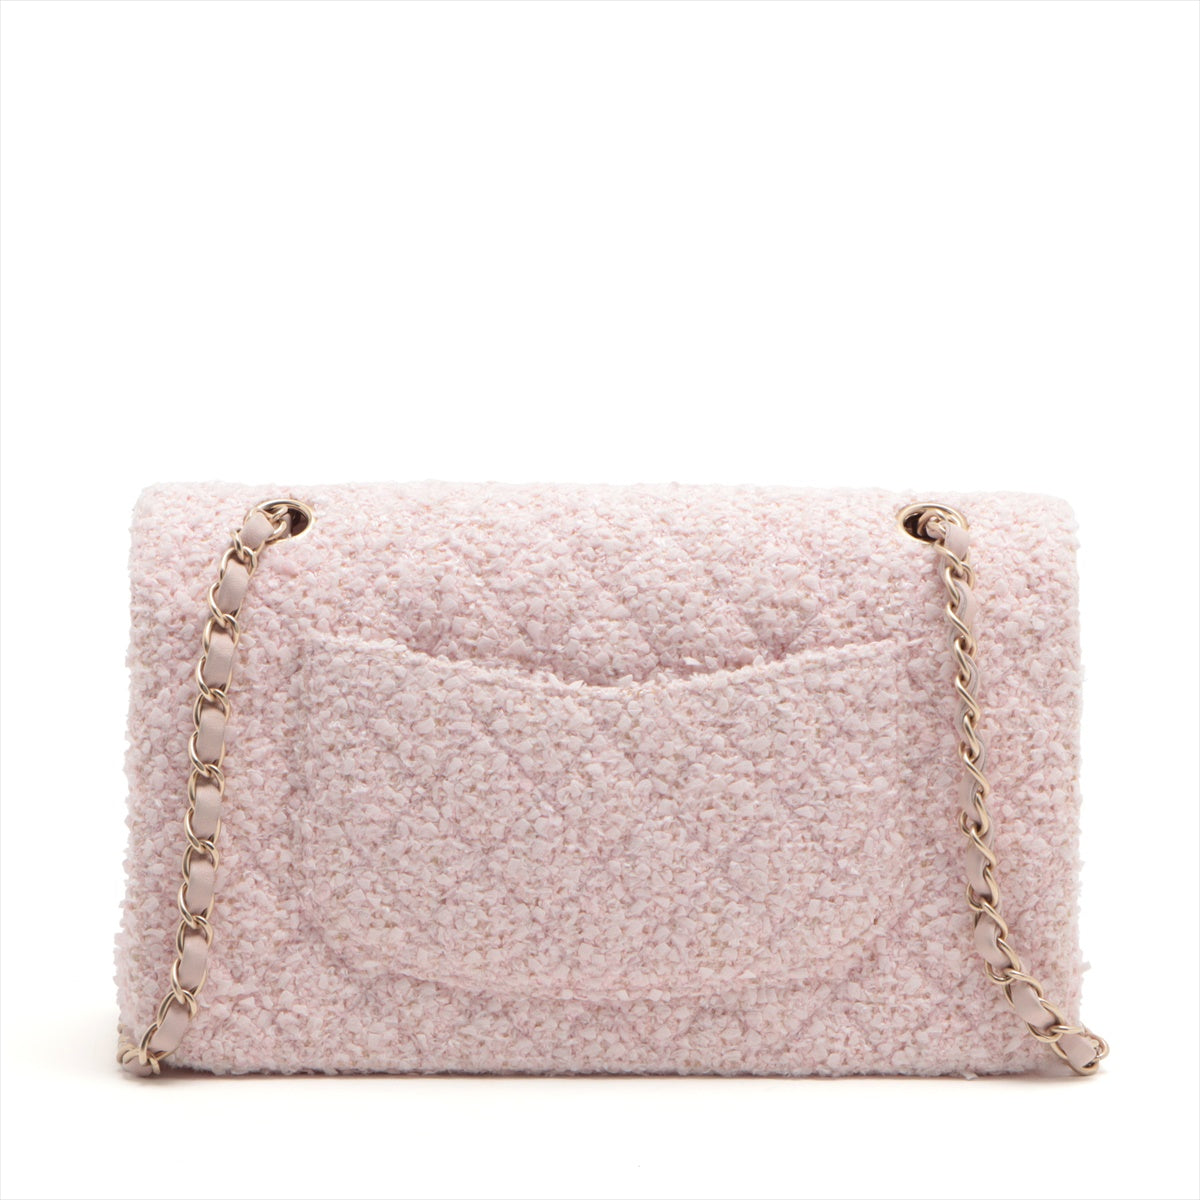 Chanel Matelasse Tweed Double flap Double chain bag Pink Gold Metal fittings 8XXXXXX